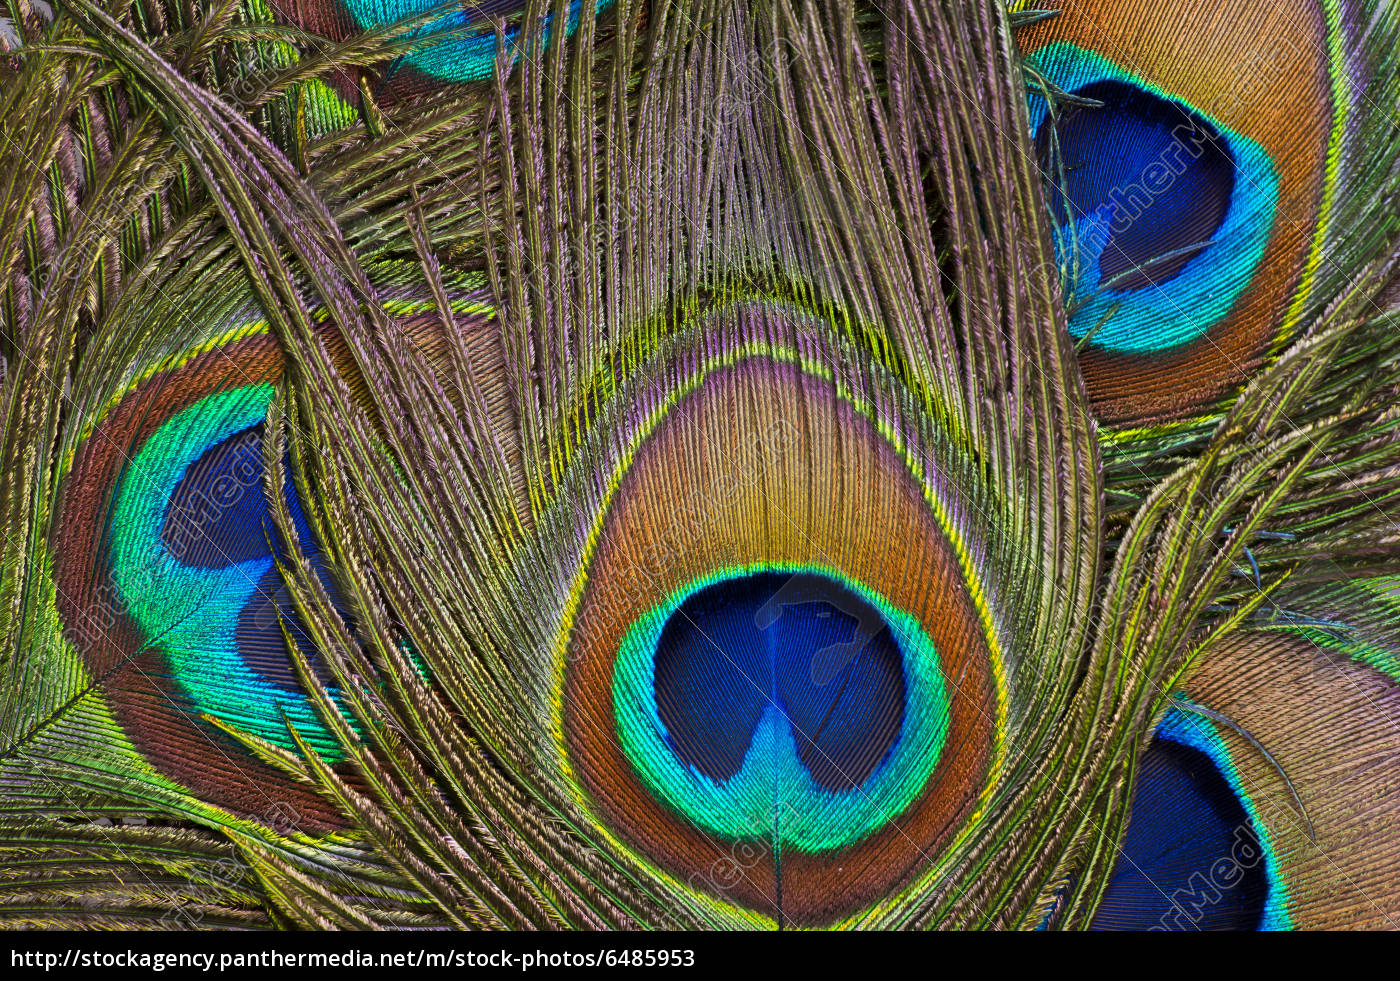 184,814 Plumas Pavo Real Images, Stock Photos, 3D objects